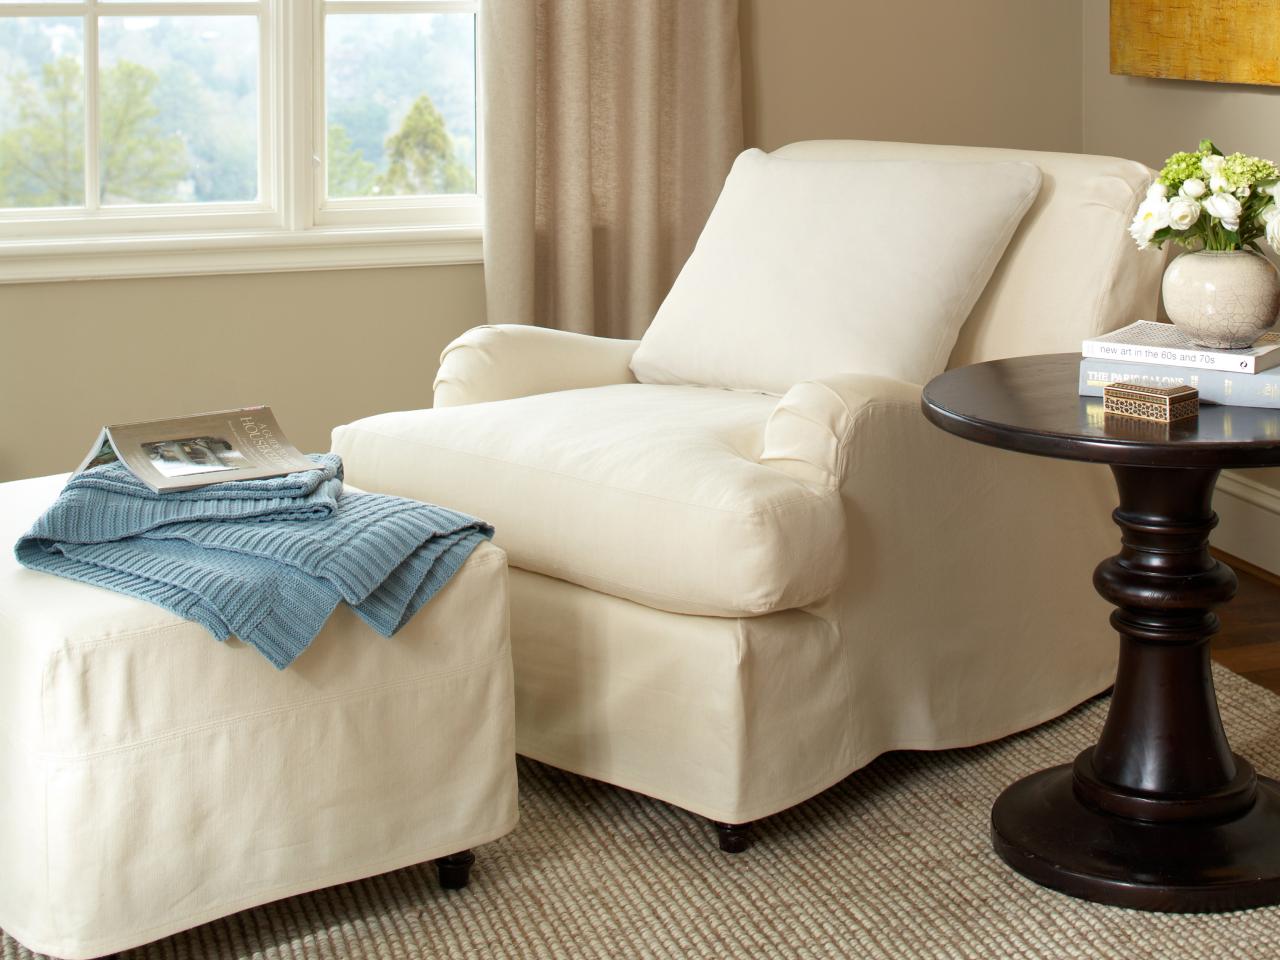 Chair And Ottoman Covers